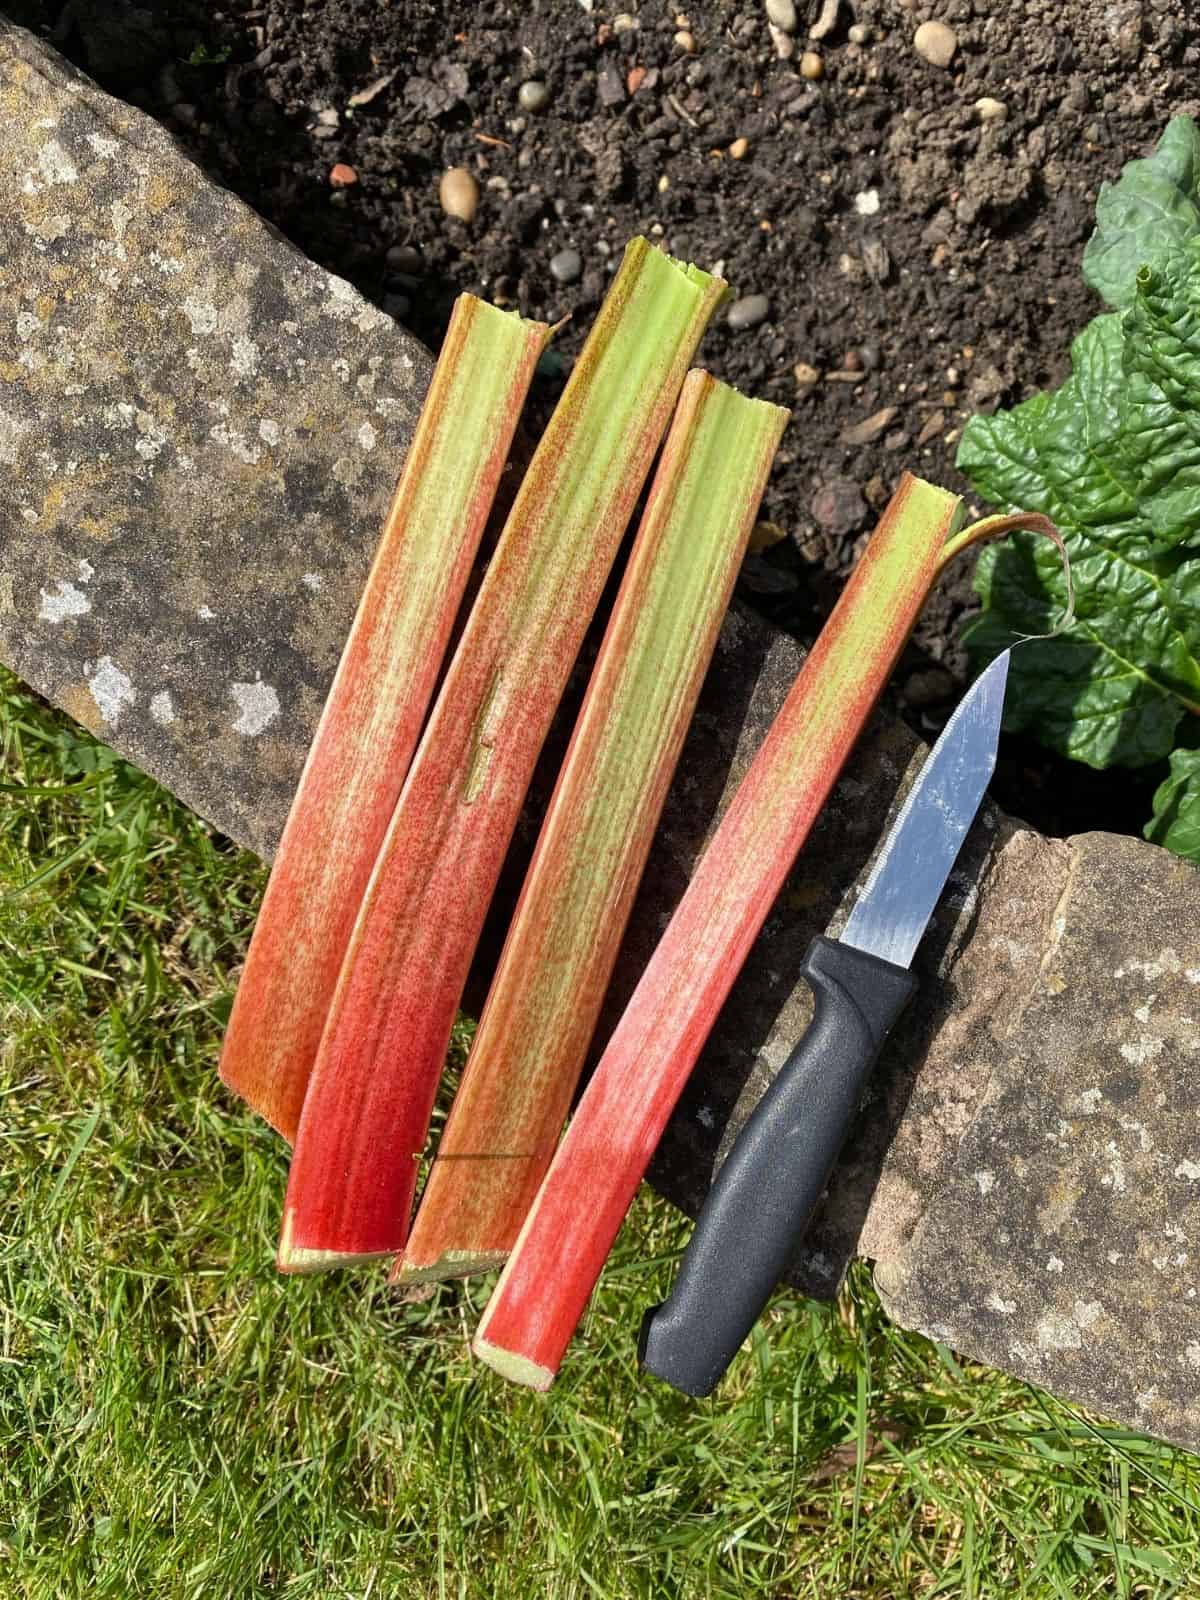 four stems of rhubarb next to a knife on a garden wall.